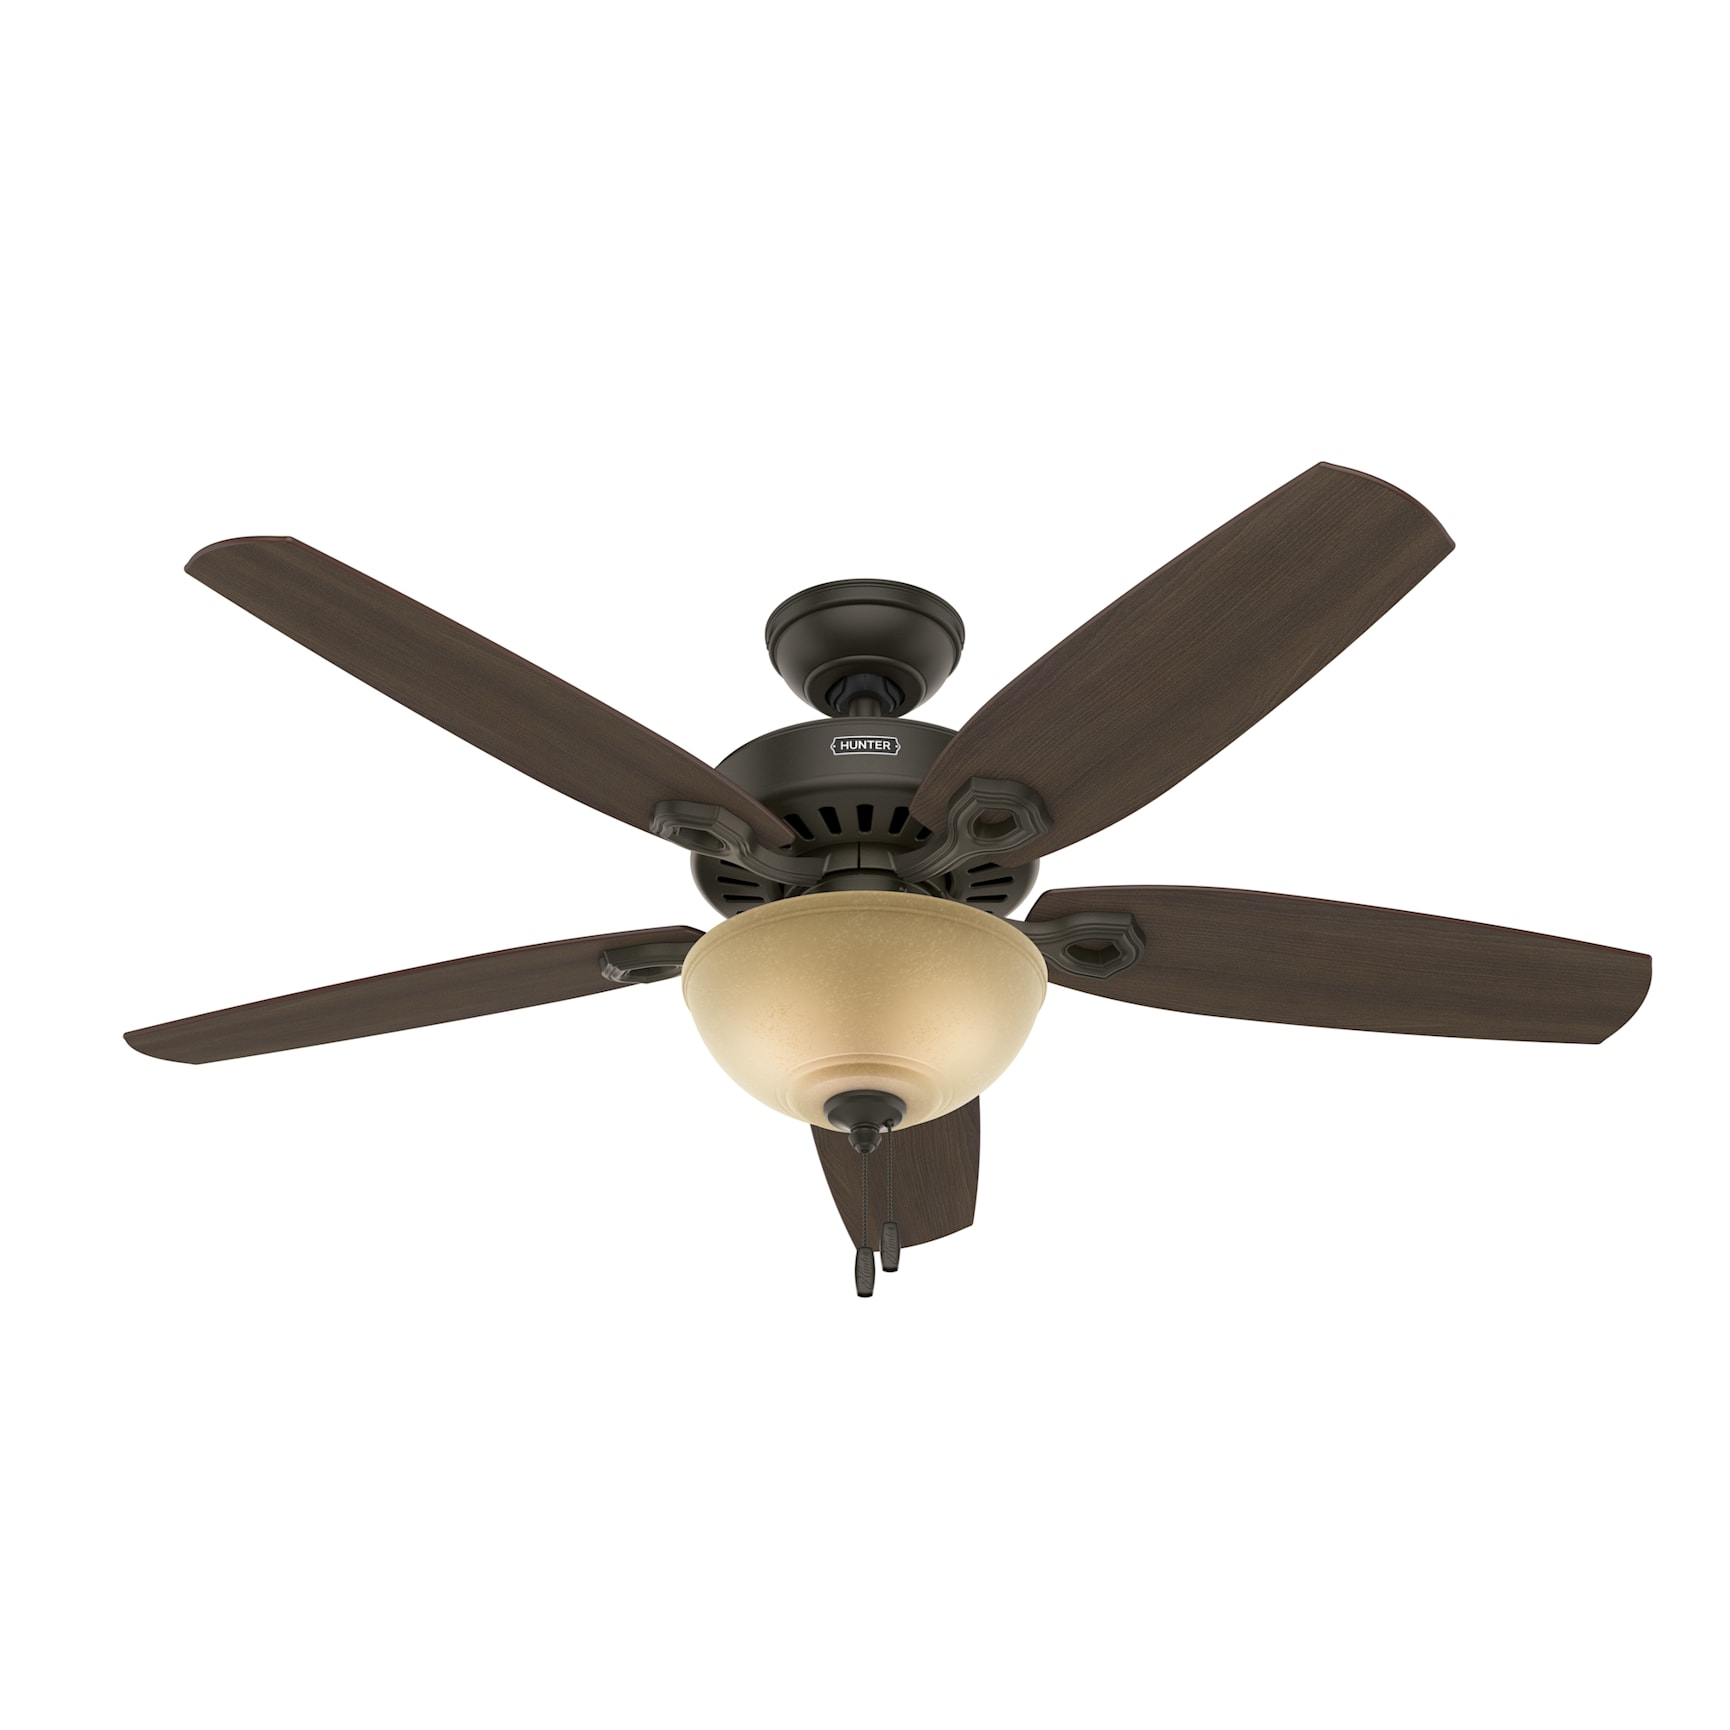 Hunter Fan Company 53091 Builder Deluxe Indoor Ceiling Fan with LED Light and Pull Chain Control